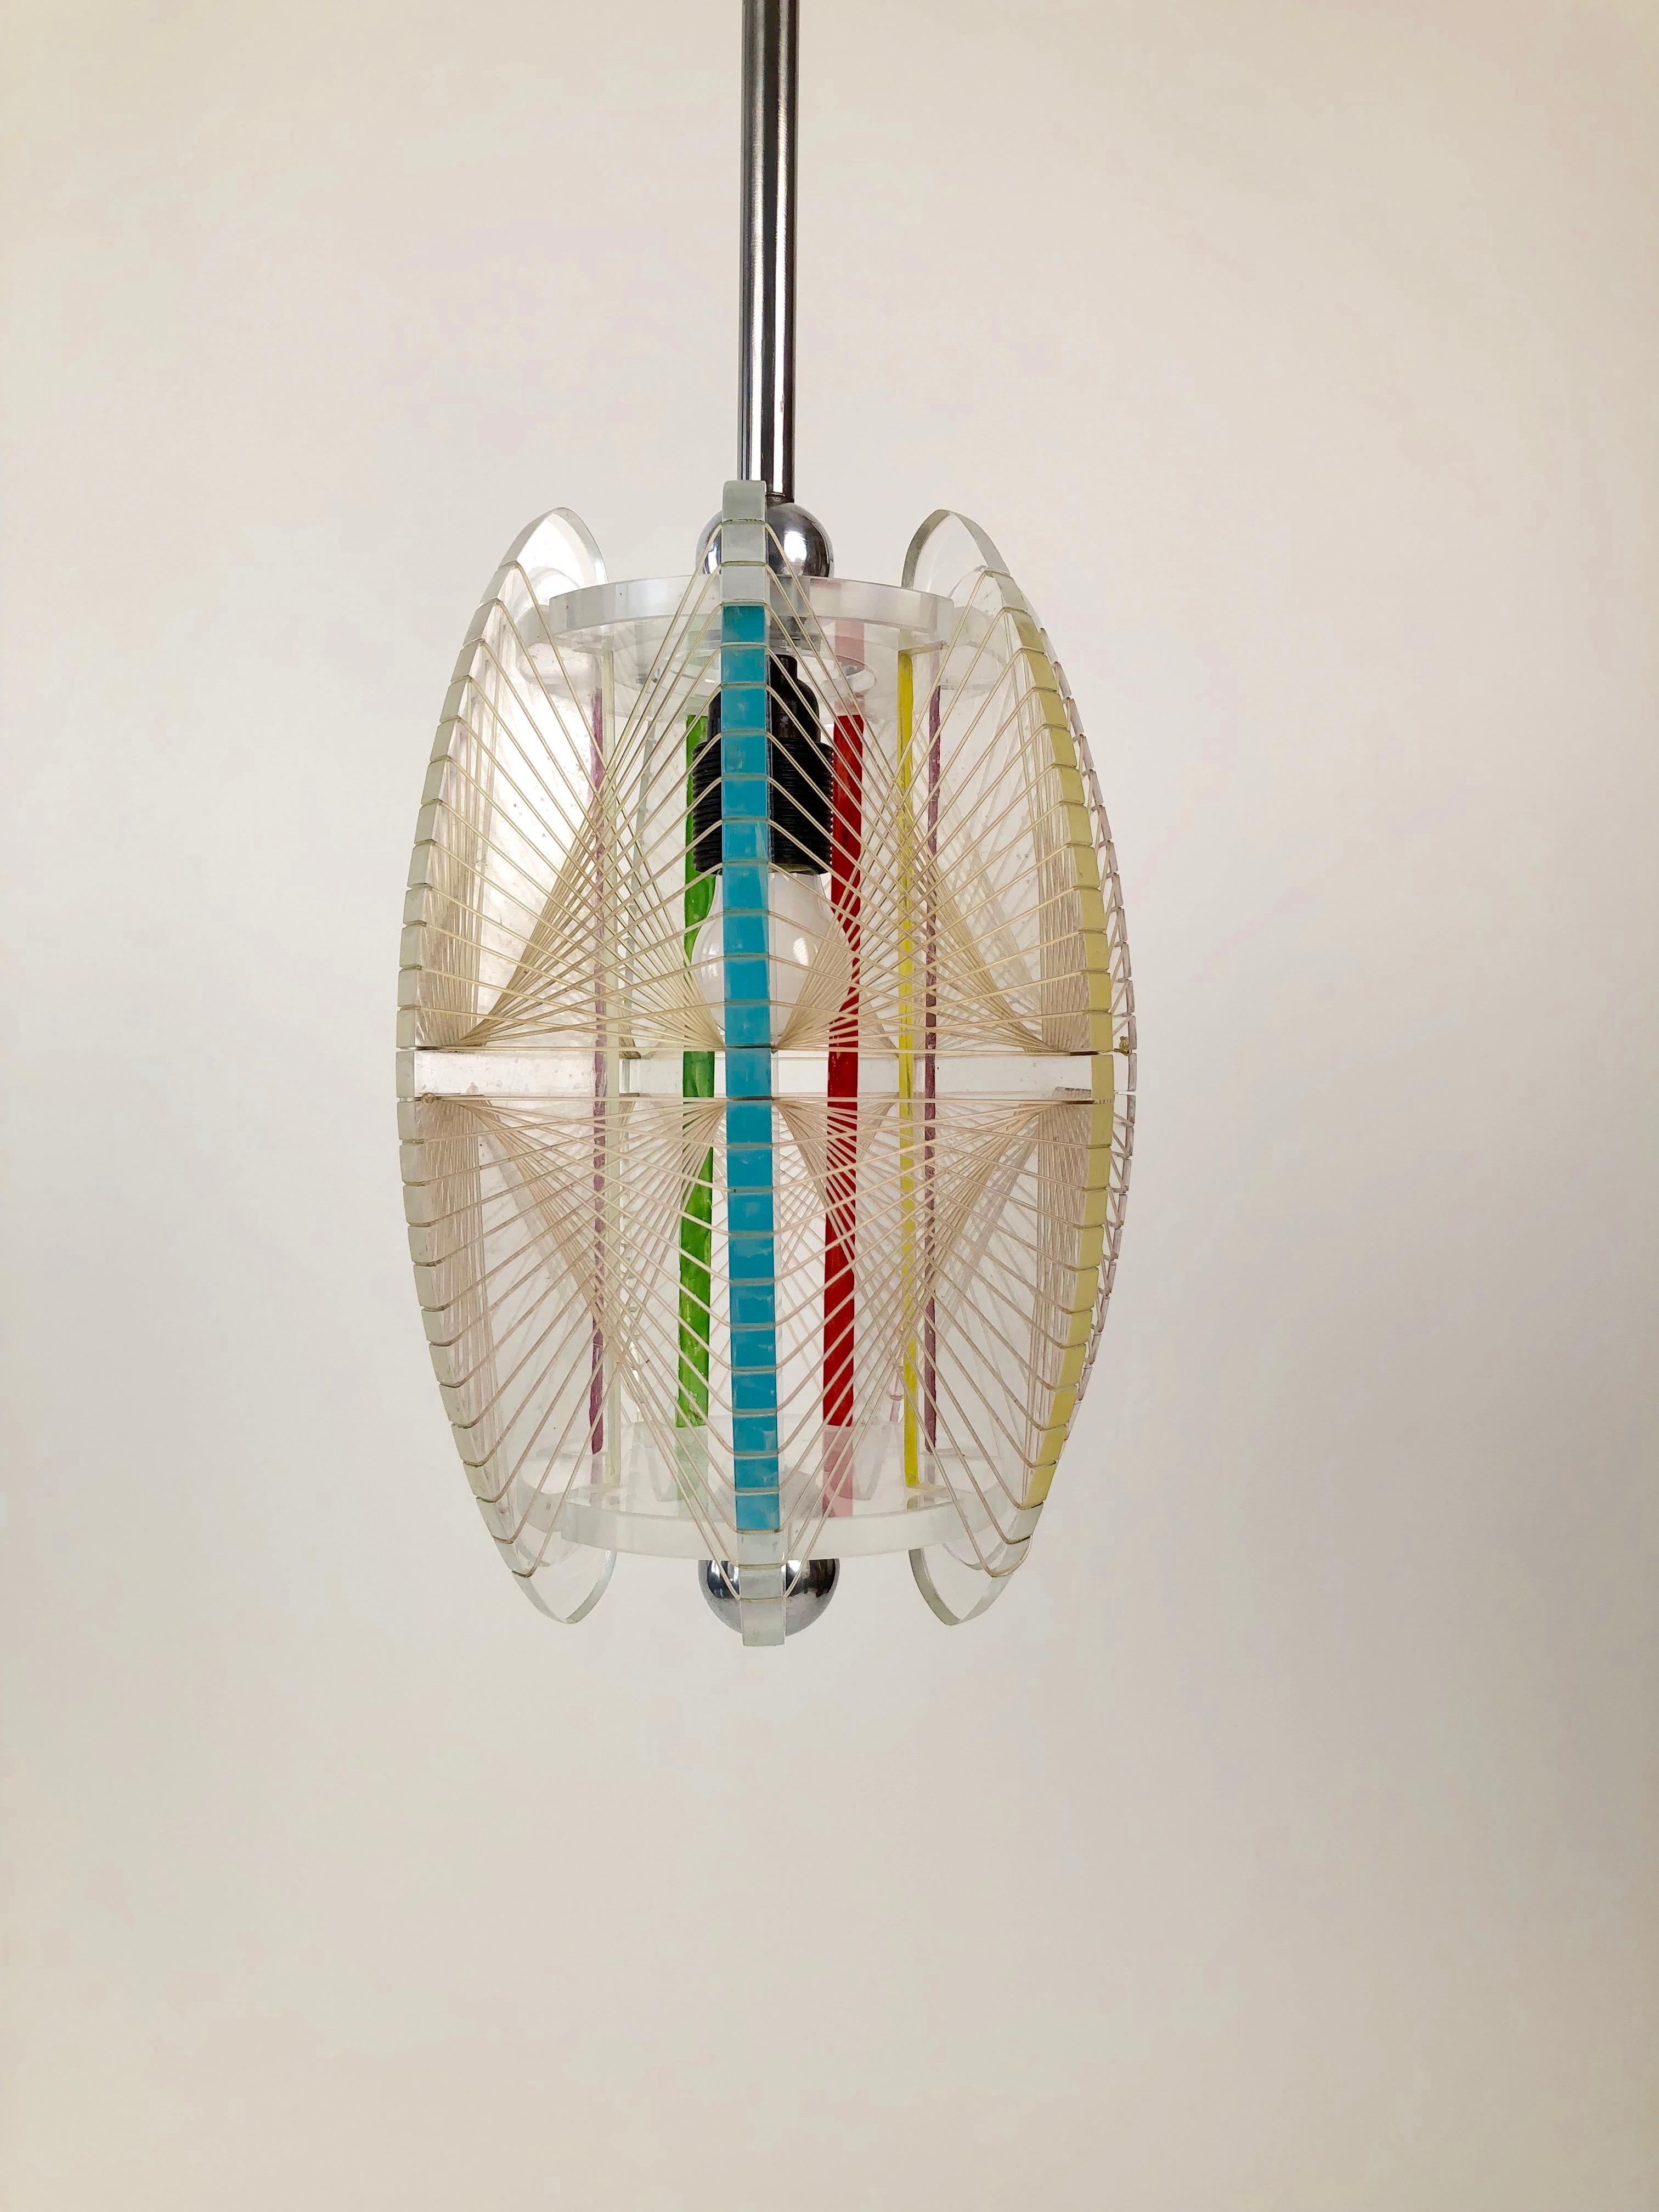 This unique acrylic and mono filament, pendant lamp comes from the Czech Republic. Made in the 1950s, the details are what make it interesting. The two metal balls at the top and bottom of the shade accent the acrylic shape while the stripes bring